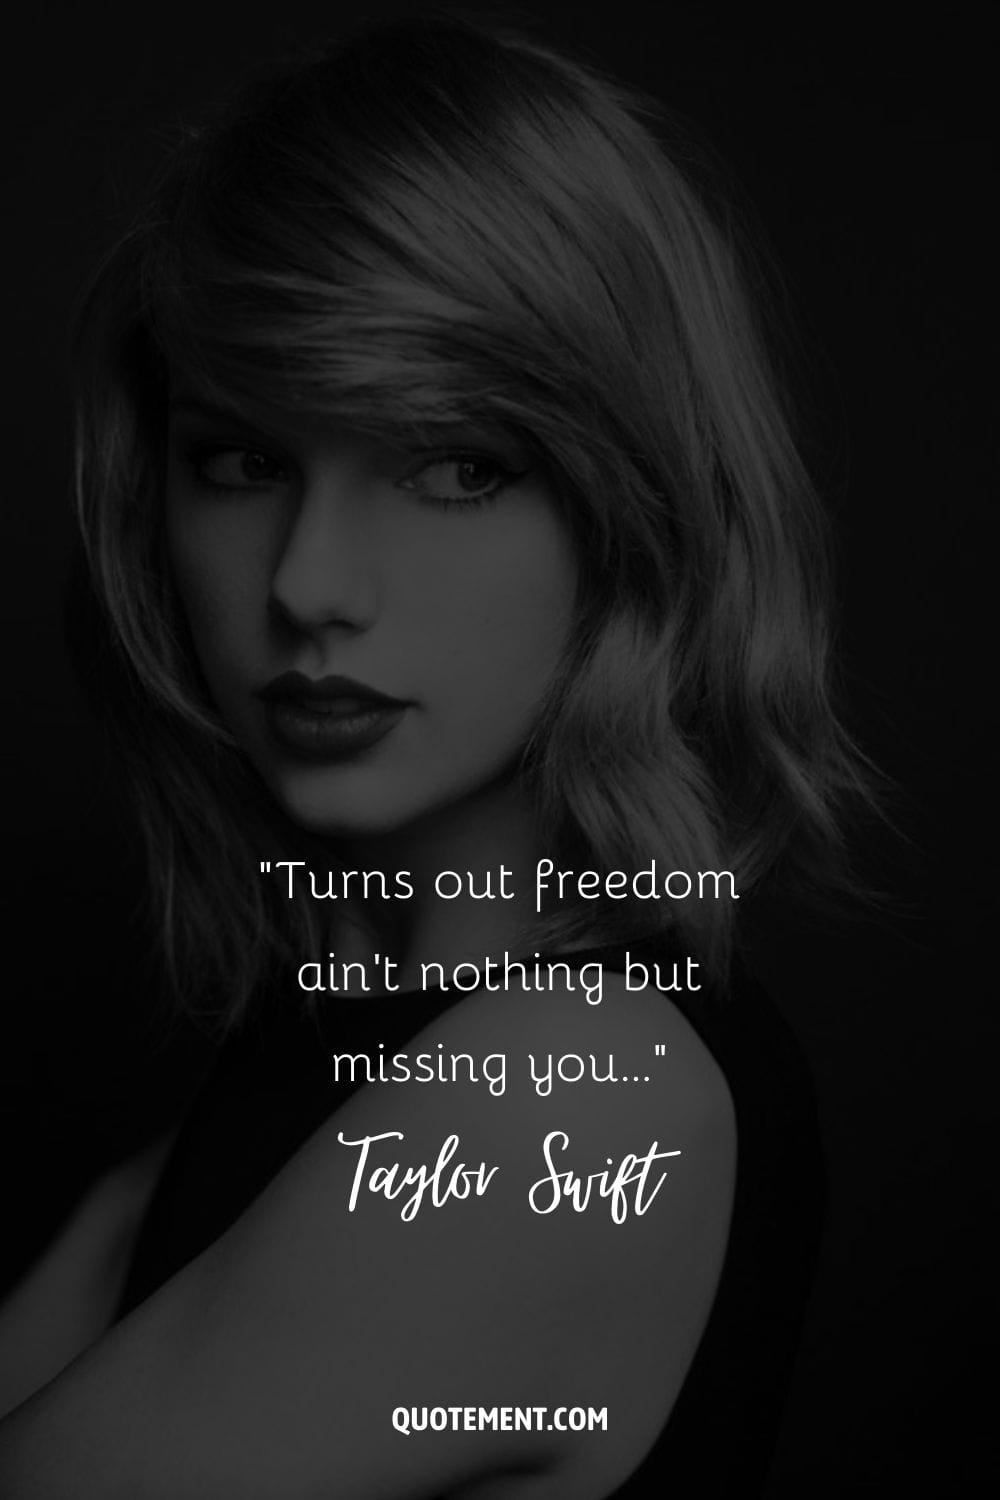 “Turns out freedom ain't nothing but missing you...” ― Taylor Swift